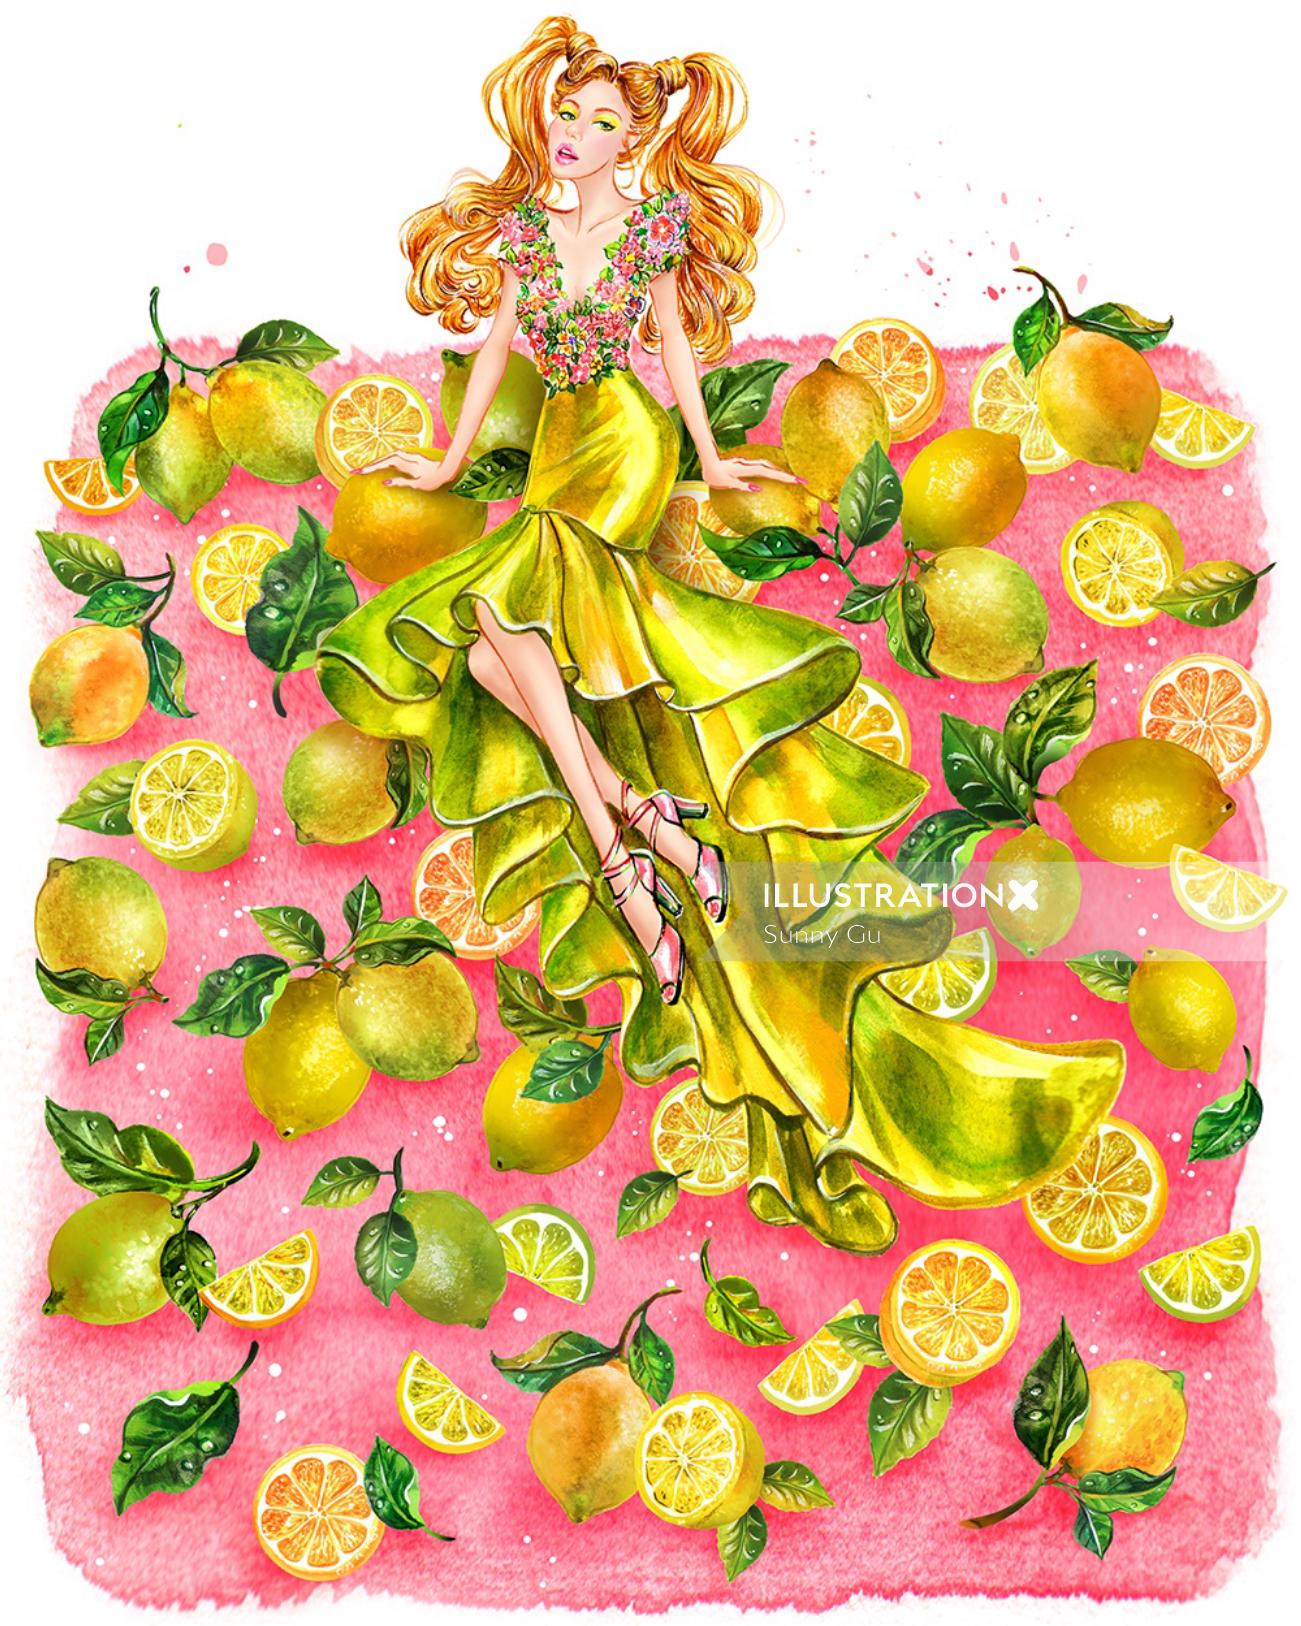 Girl in yellow couture gown fashion illustration